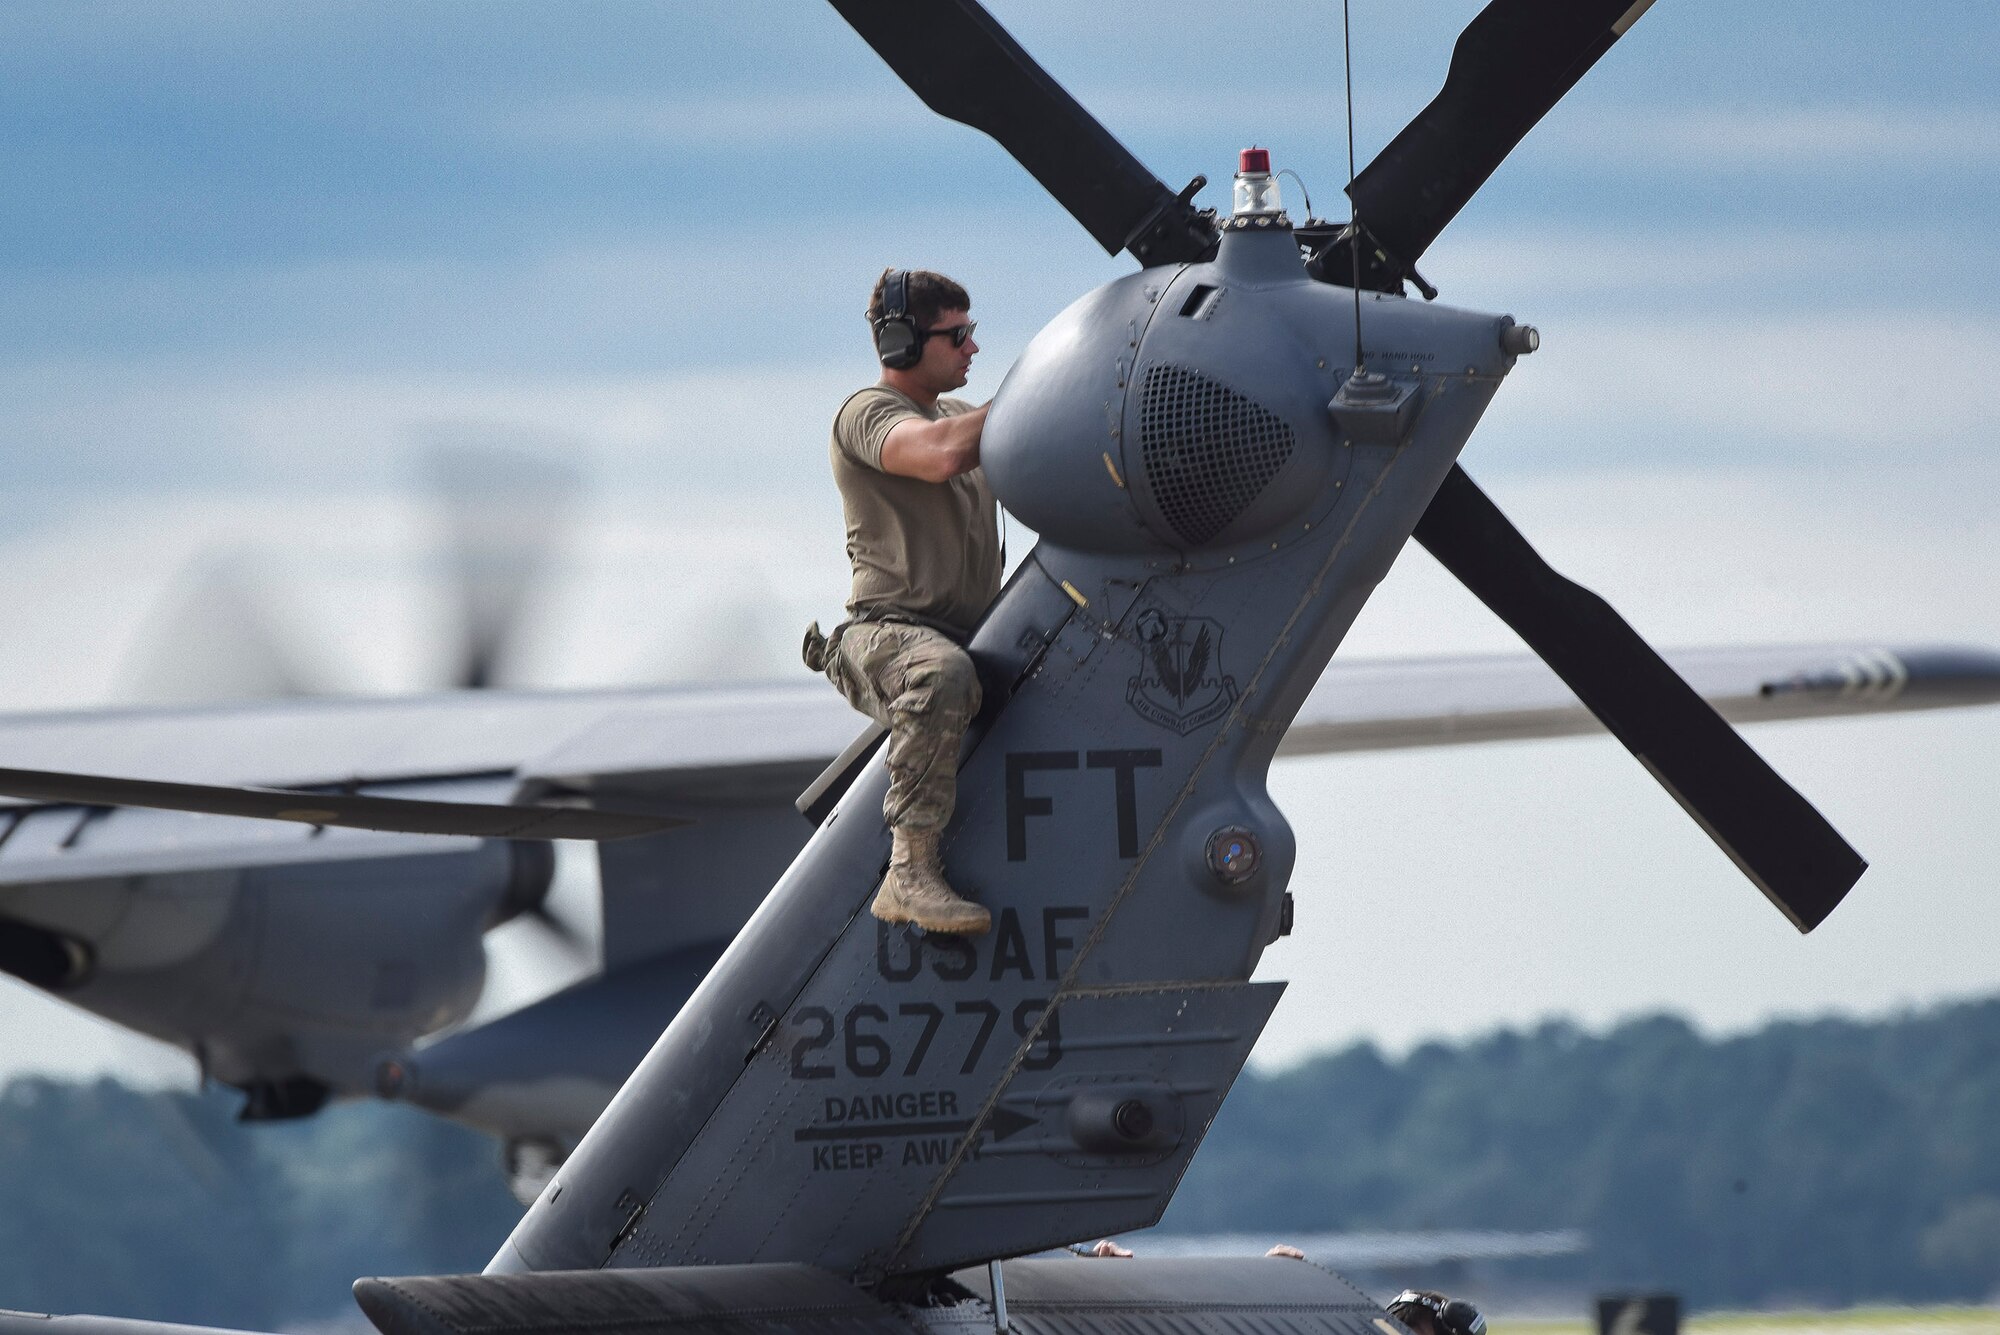 An Airman from the 41st Helicopter Maintenance Unit performs maintenance on an HH-60G Pavehawk tail rotor, Sept. 9, 2017, at Moody Air Force Base, Ga. Team Moody aircraft and rescue assets travelled to Columbus Air Force Base, Miss., for shelter before re-engaging with other Moody assets to assist the Federal Emergency Management Agency and other first responder agencies during upcoming Hurricane Irma in the Southeast region. (U.S. Air Force photo by Senior Airman Greg Nash)